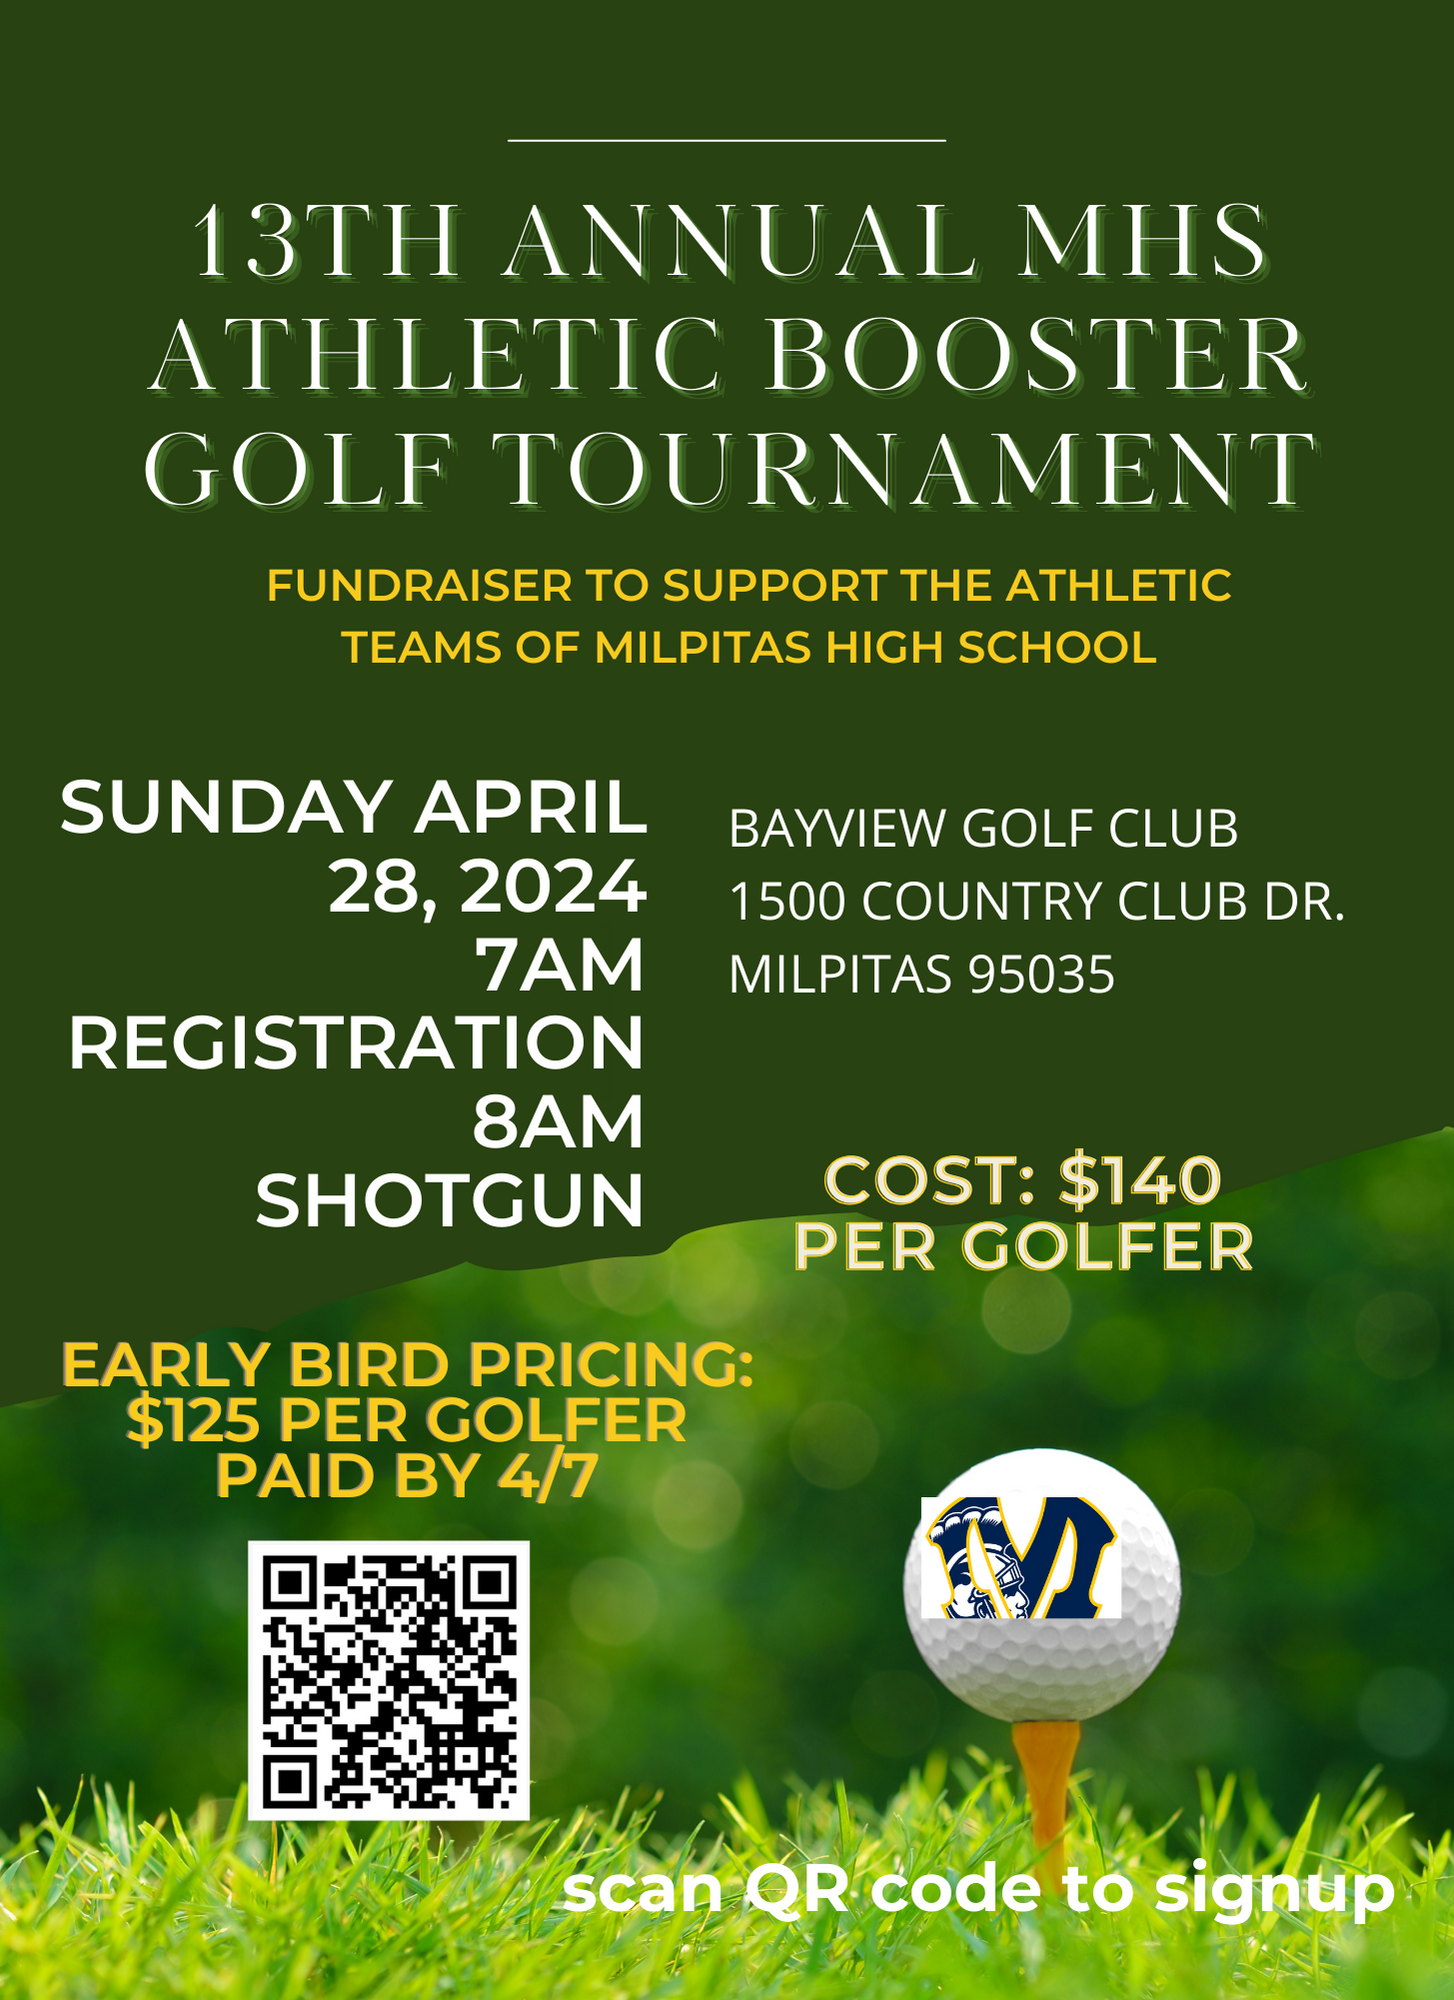 MHS Athletic Booster Golf Tournament